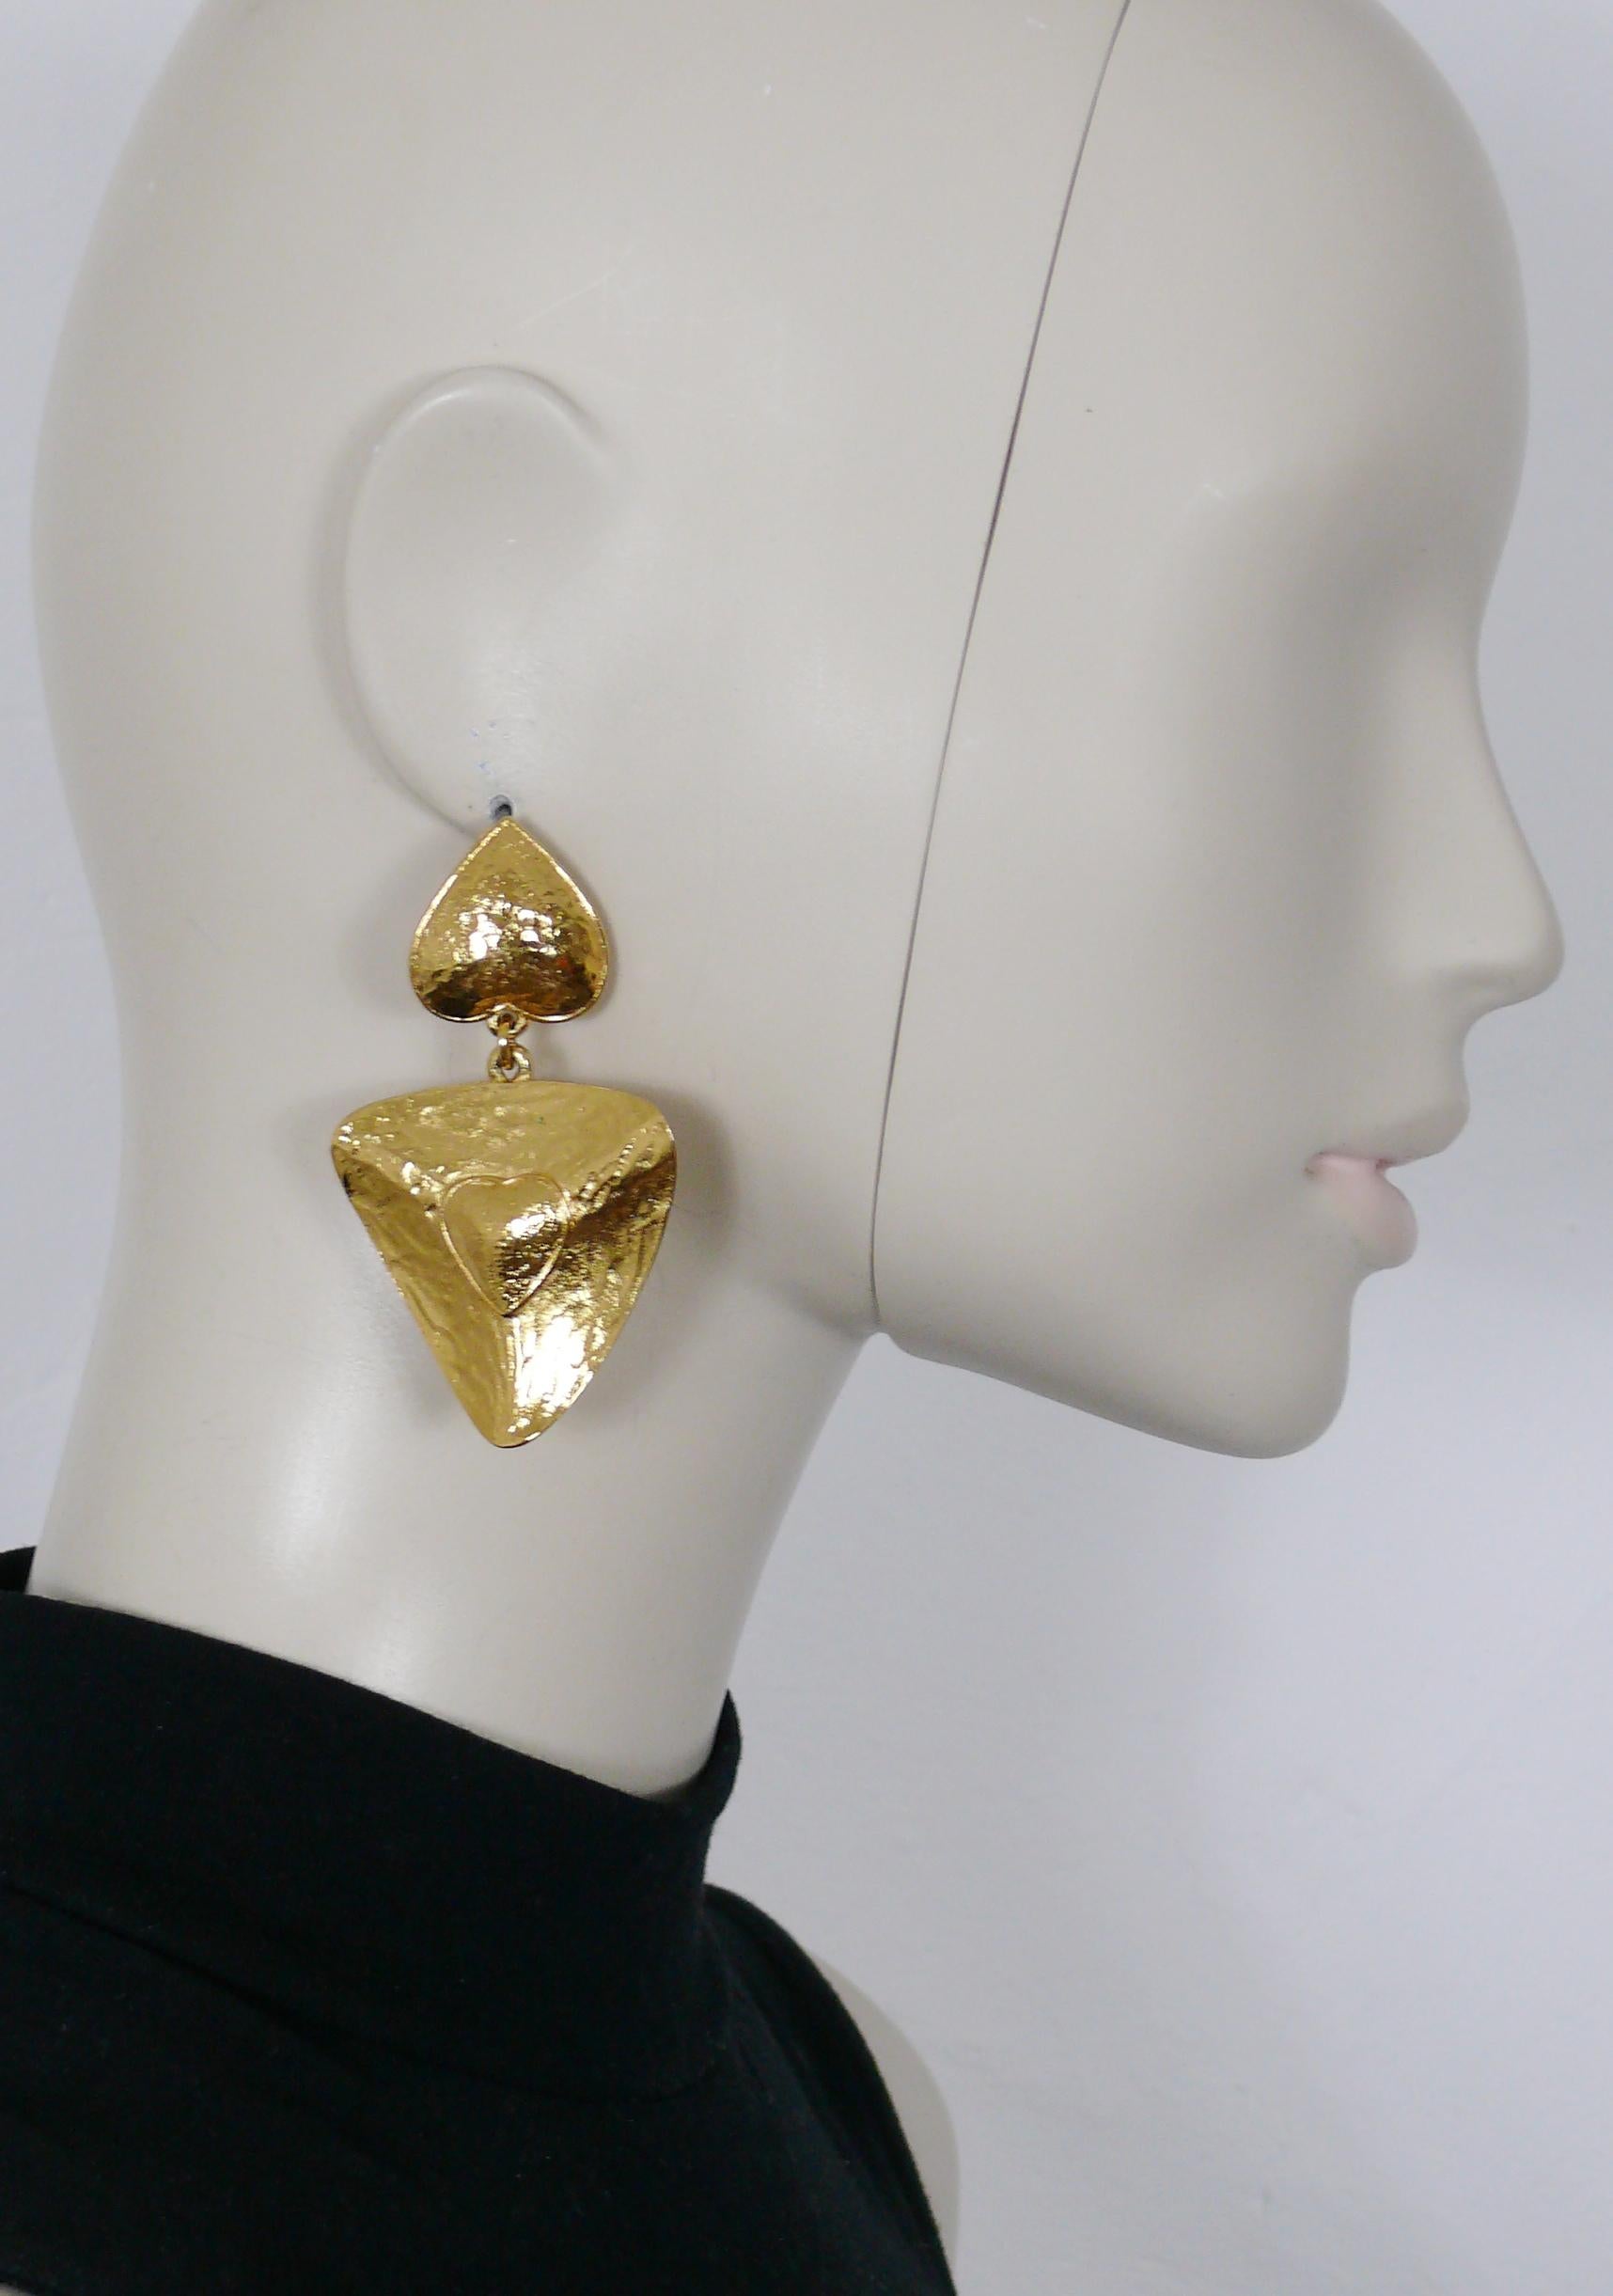 YVES SAINT LAURENT vintage textured gold toned dangling earrings (clip on) featuring two hearts.

Embossed YSL Made in France.

Indicative measurements : max. height approx. 7.2 cm (2.83 inches) / max. width approx. 4.4 cm (1.73 inches).

NOTES
-